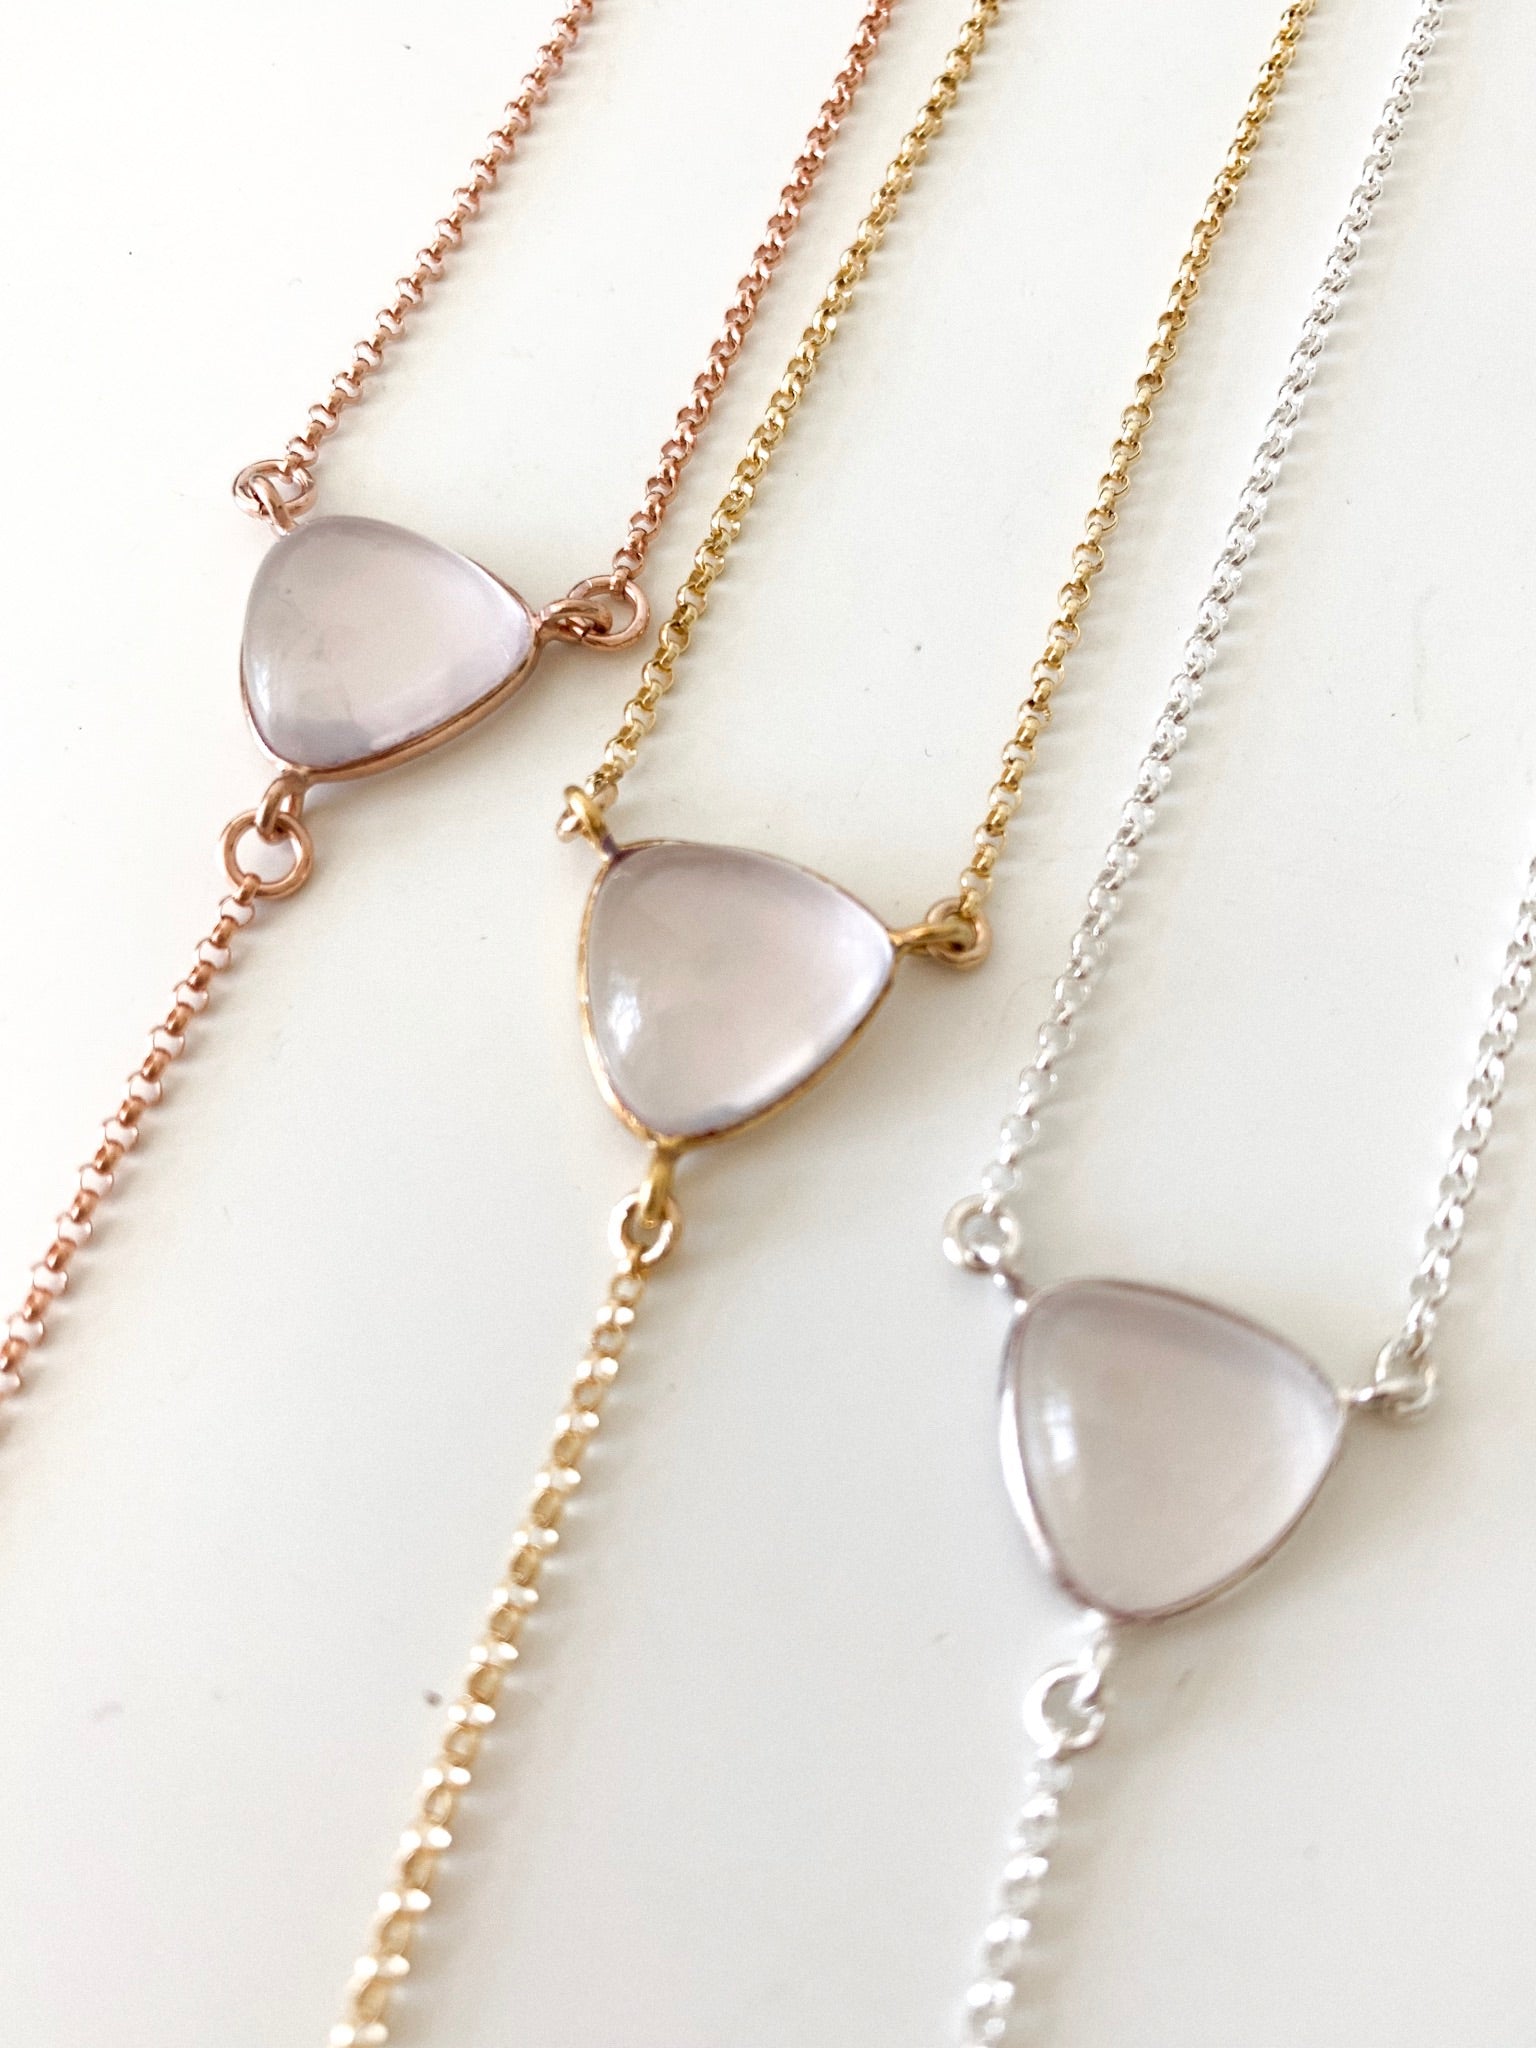 a set of three rose quartz lariat pendants, in rose gold, gold and silver chain styles on a white background